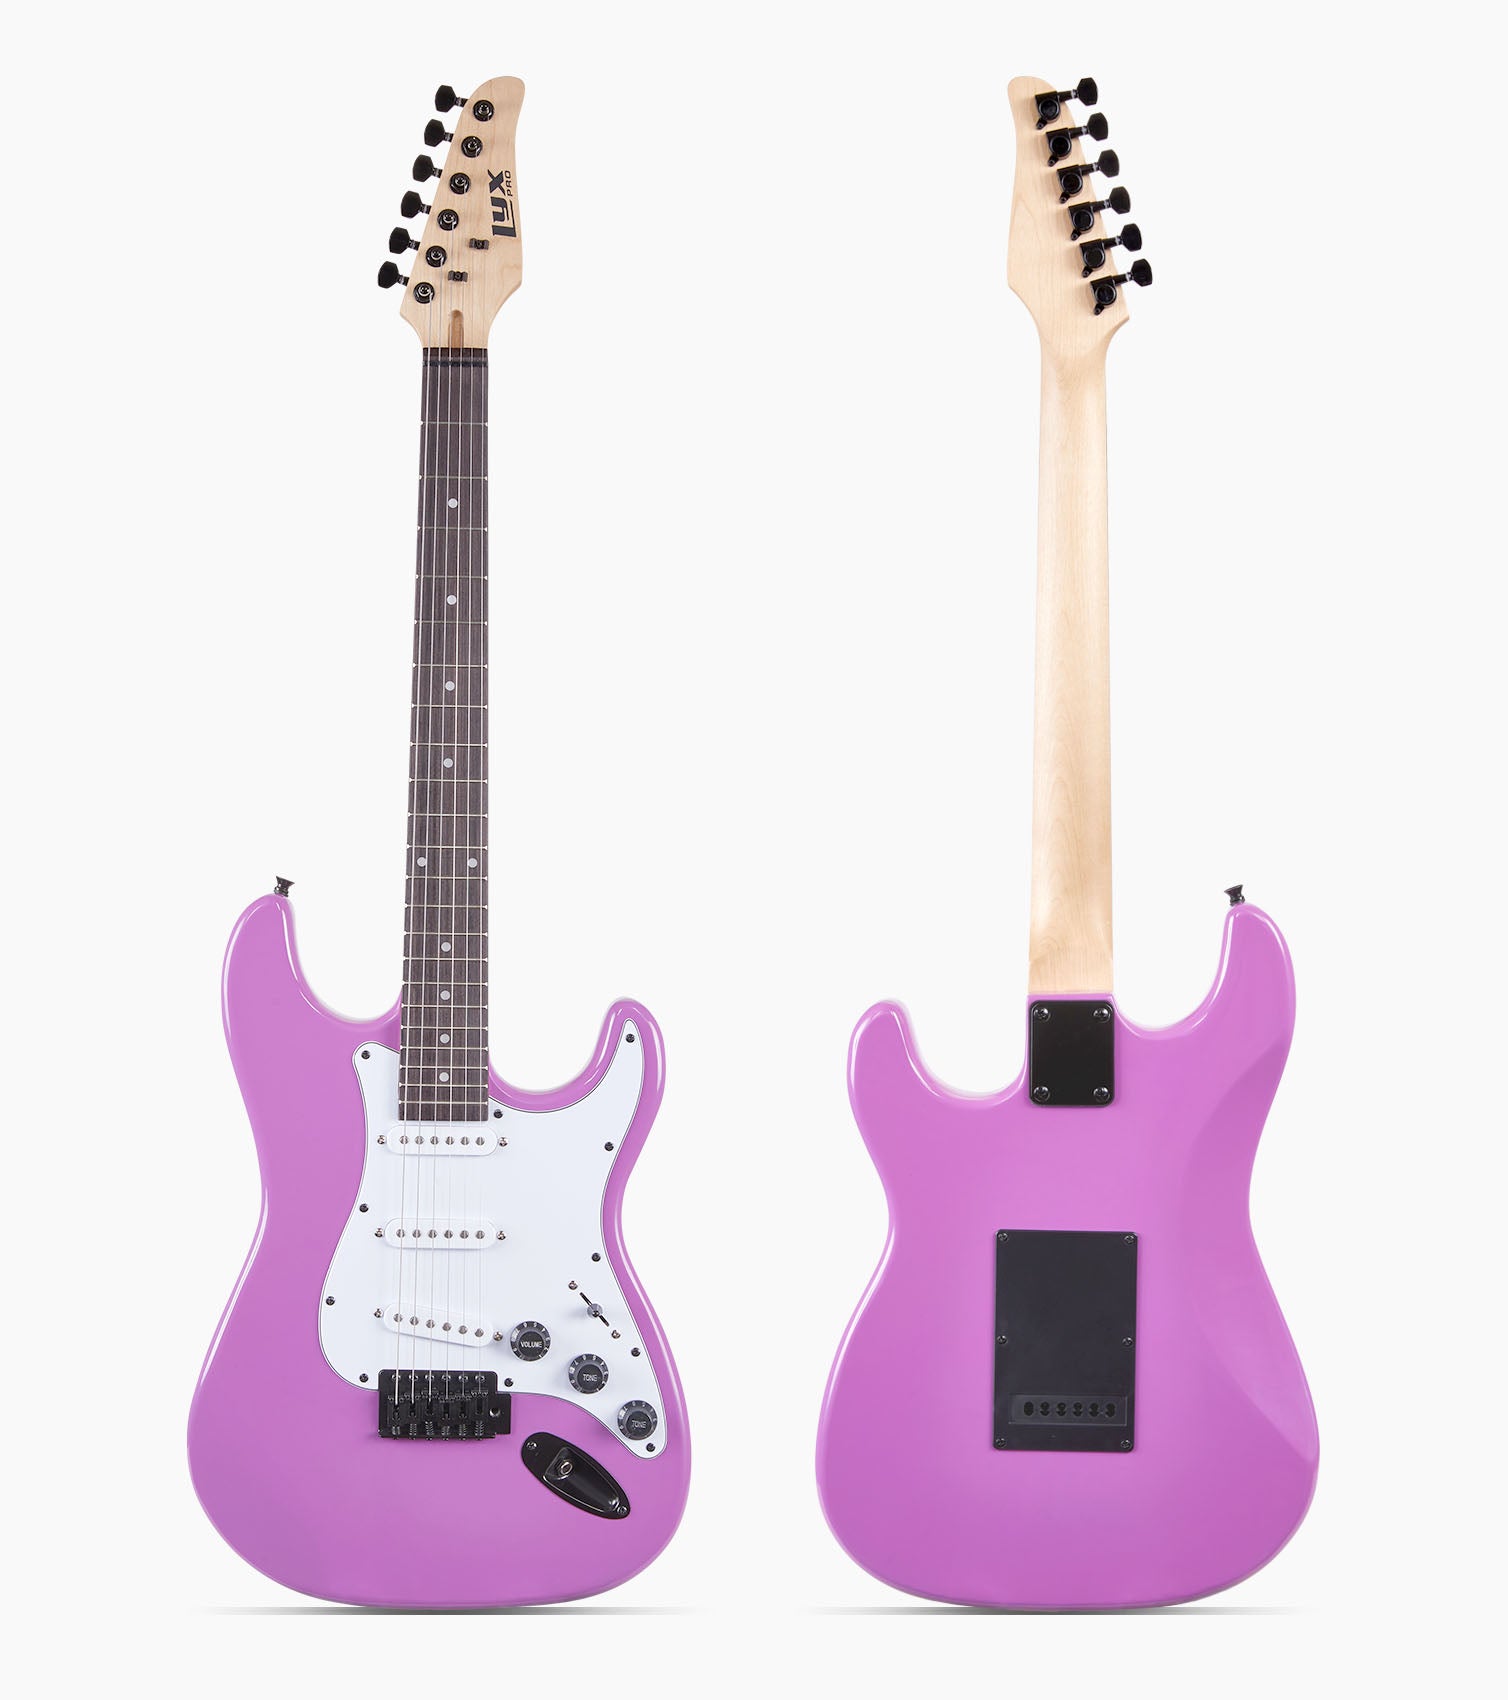 39 in Retro Purple Stratocaster Electric Guitar & Starter Kit - Front and Back